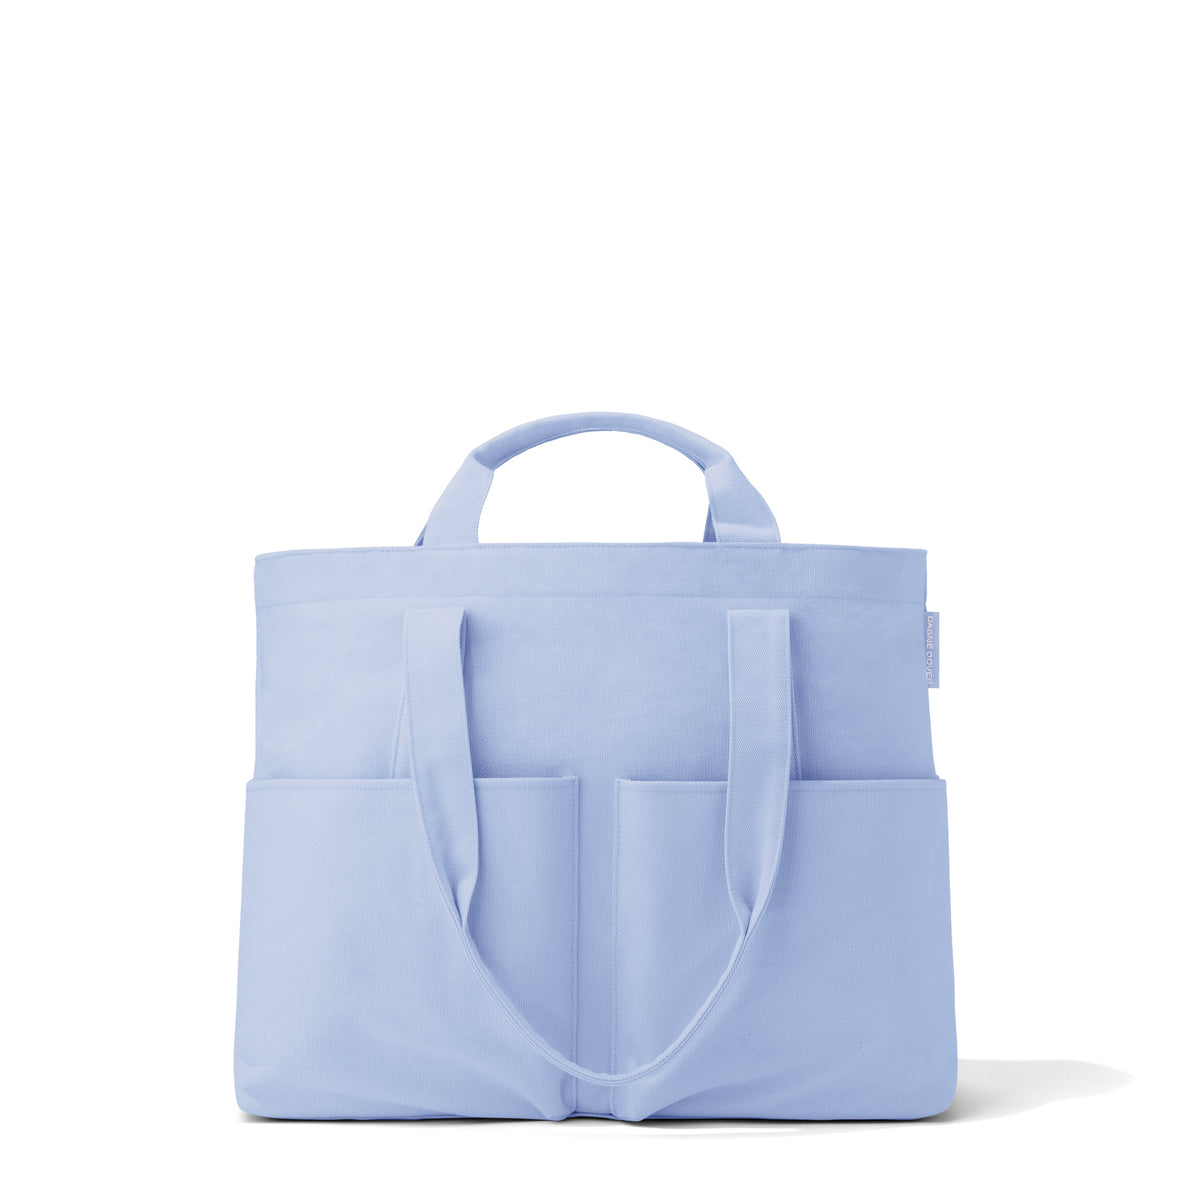 Blue Tote Bag with Zipper Pocket, Vegan, Recycled Cotton